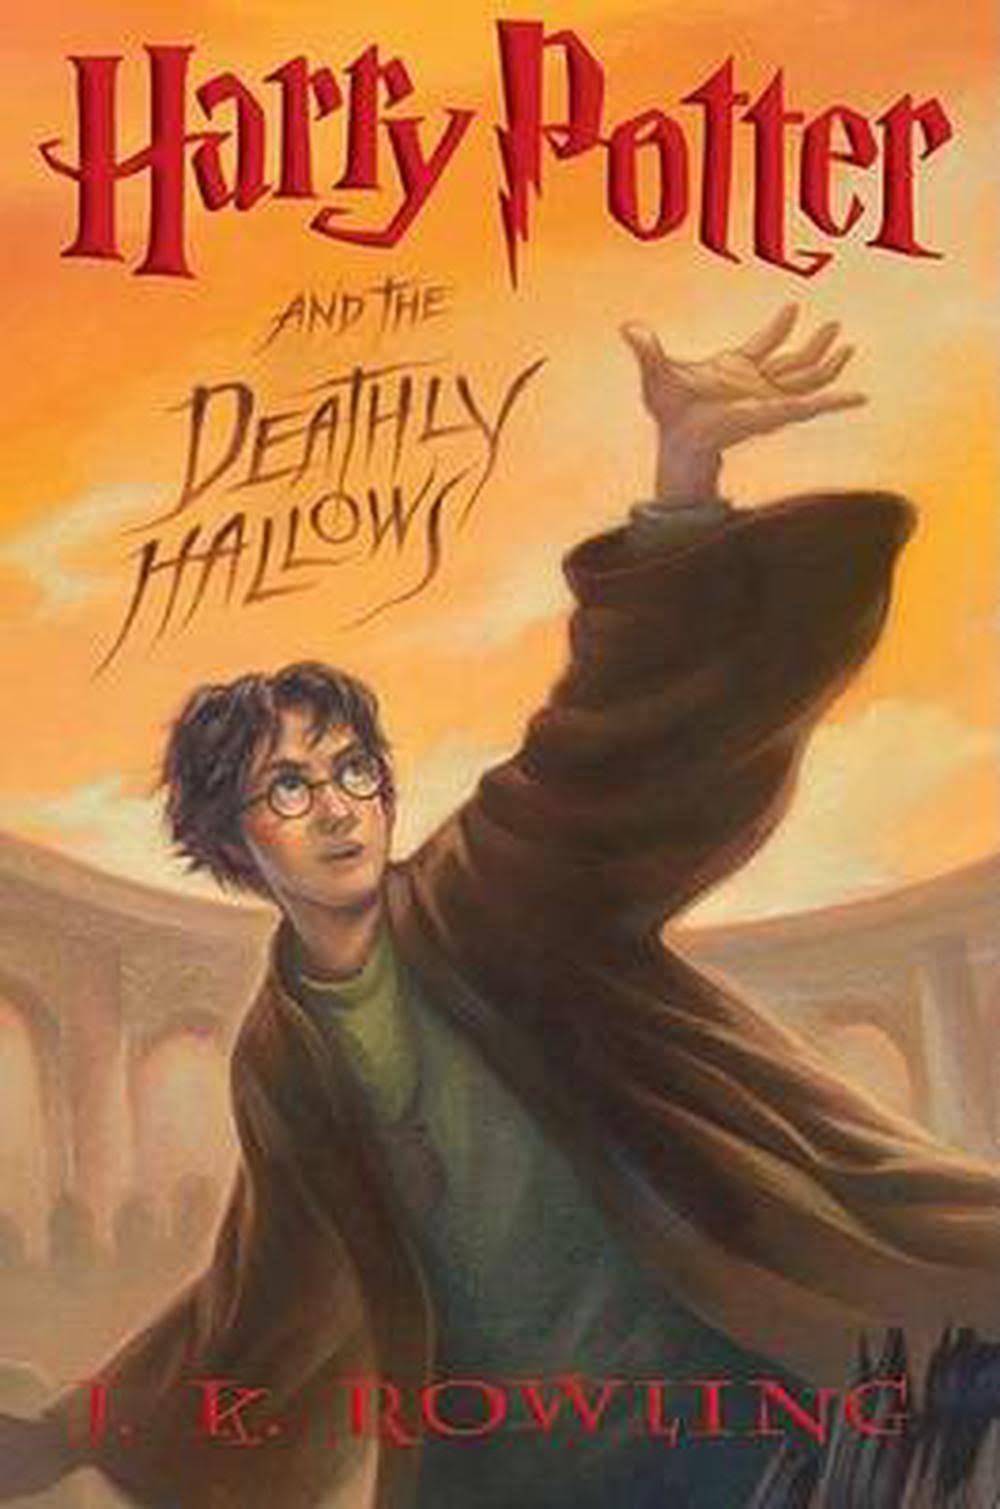 Harry Potter and The Deathly Hallows by Rowling J. K